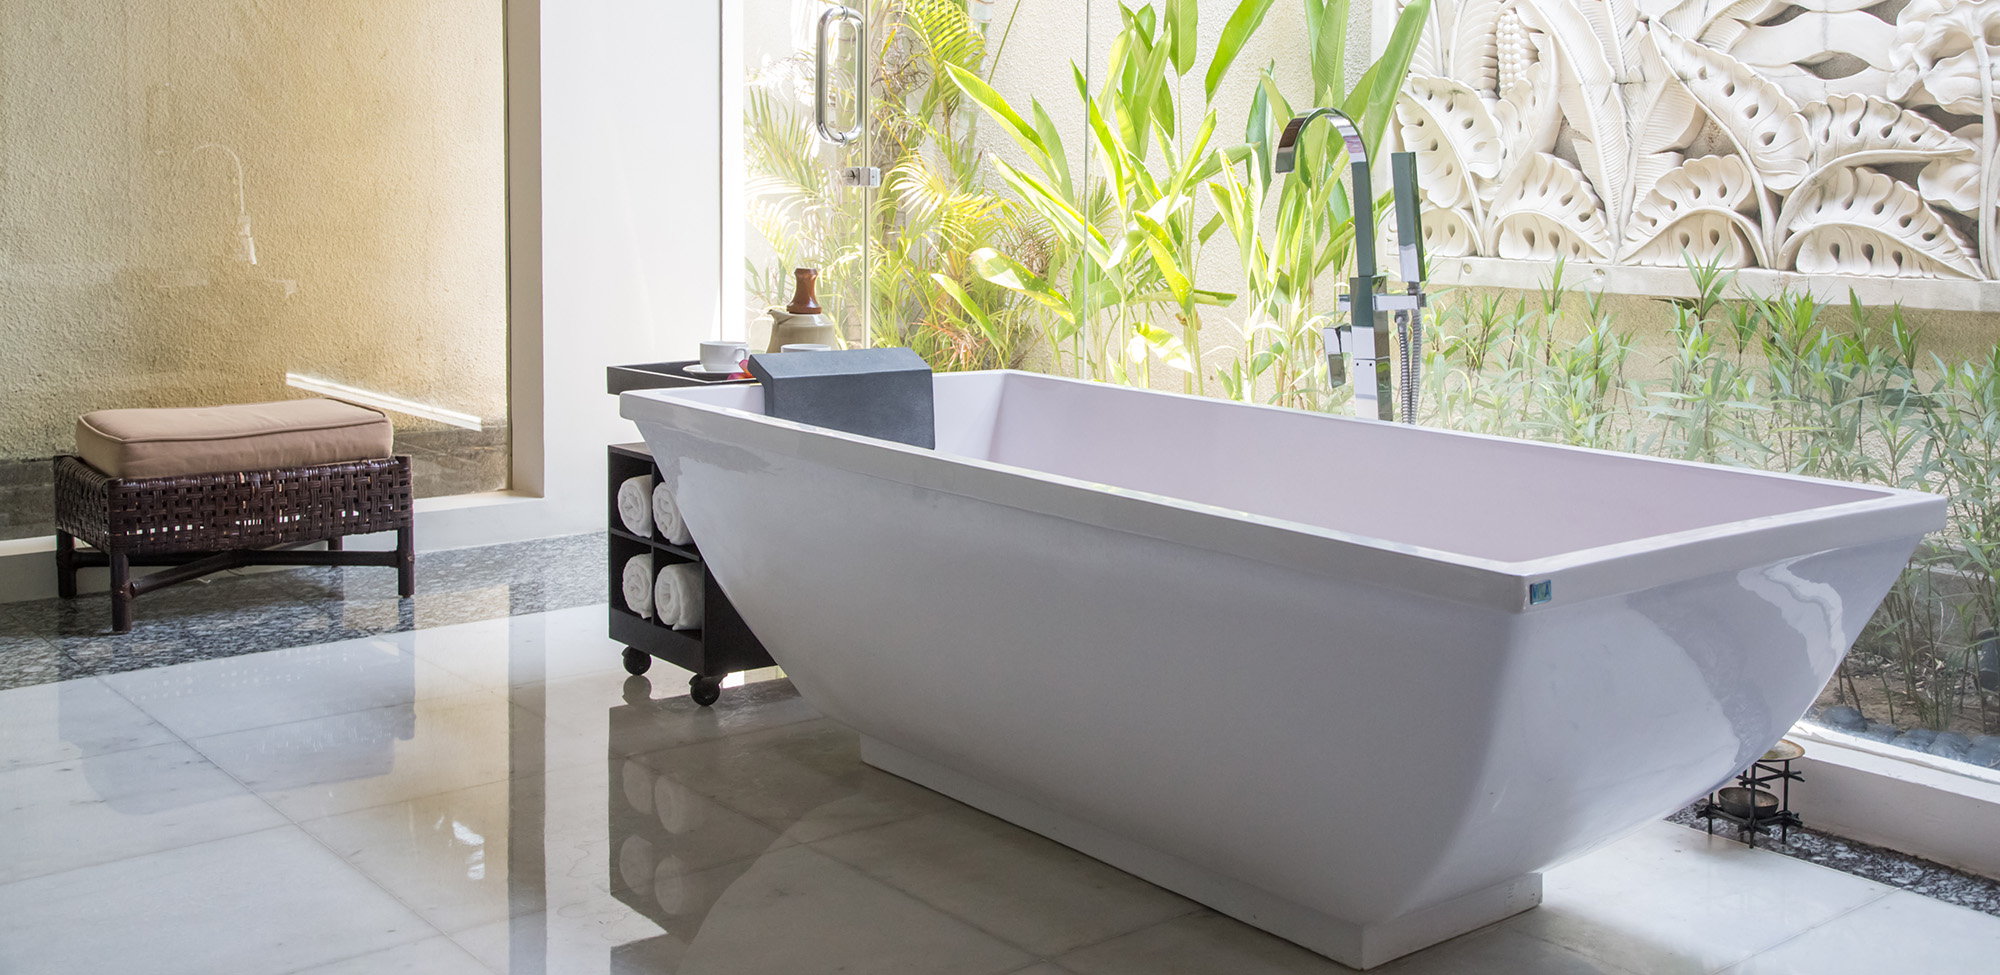 10 Tips To Consider For Your Bathroom Renovation